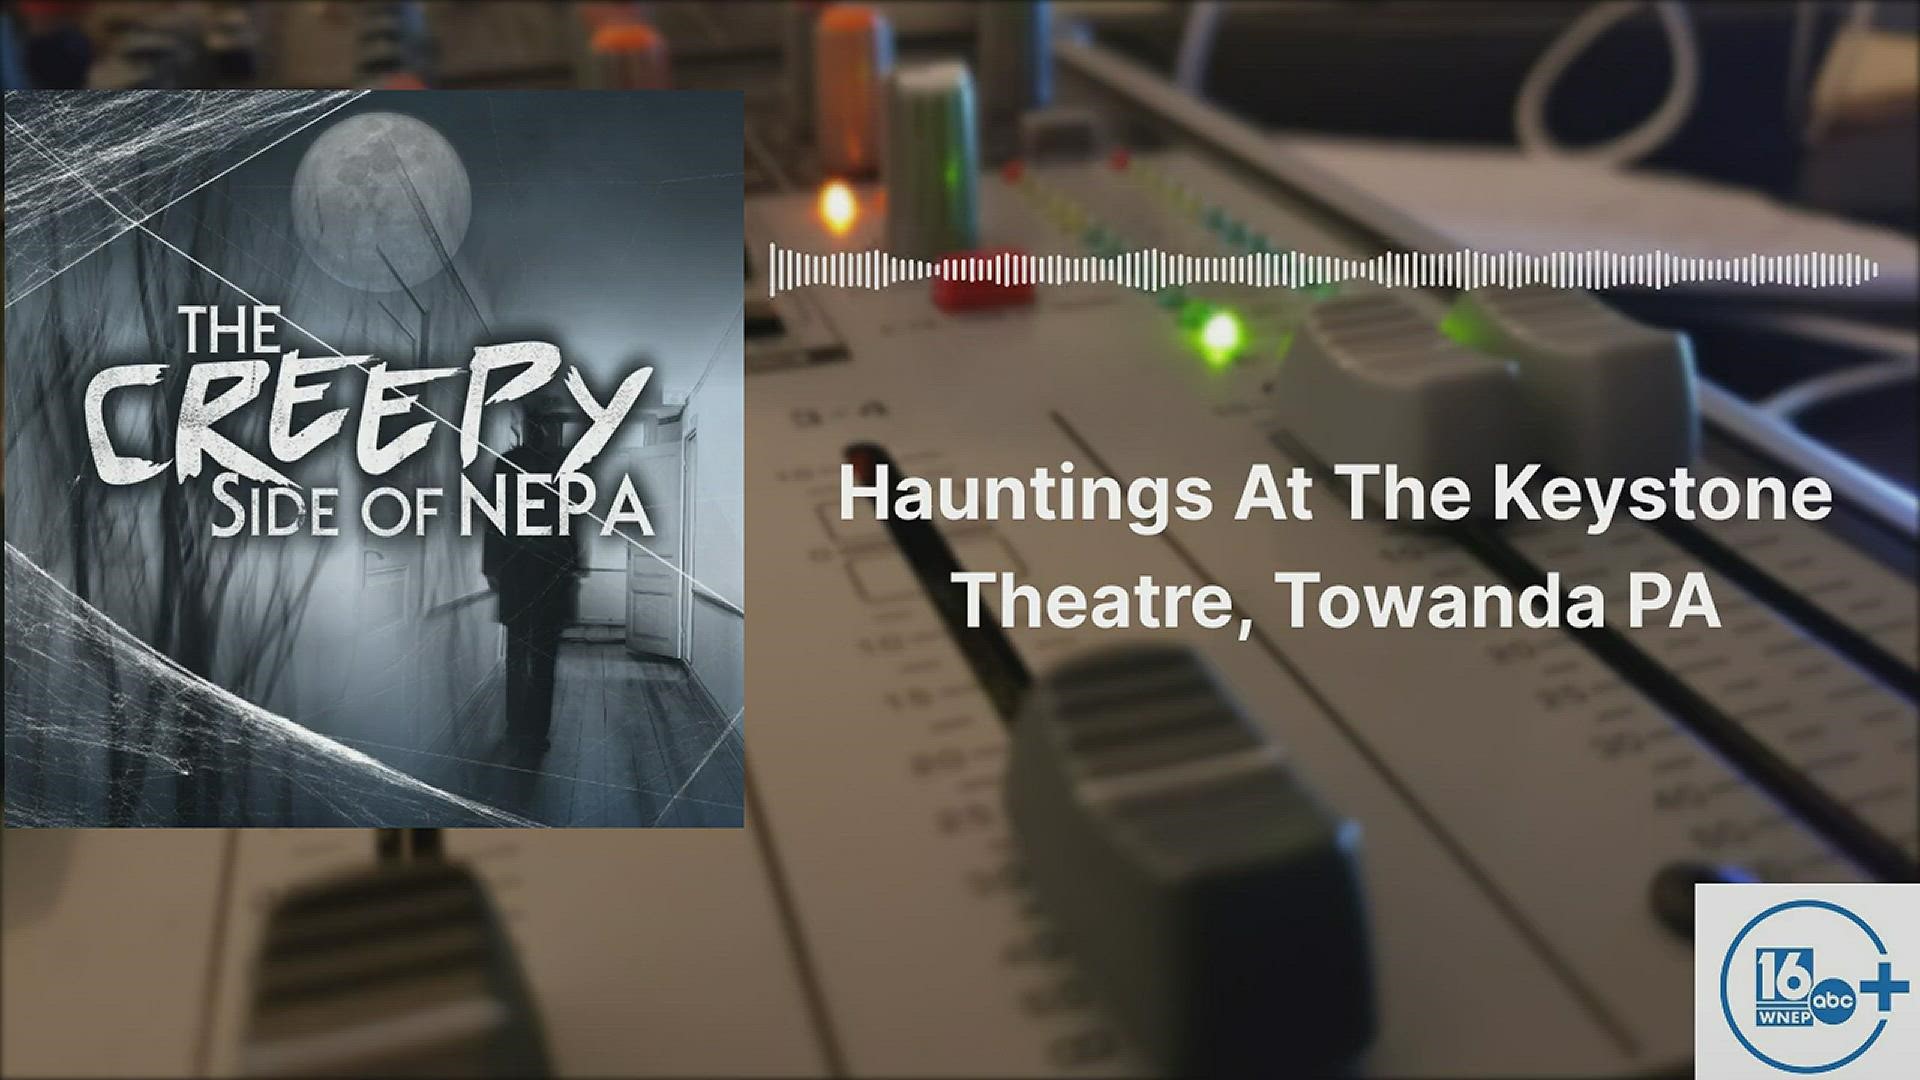 On this episode, we talk with the Bradford County Regional Arts Council about upcoming events and paranormal stories surrounding the Keystone Theatre in Towanda, PA.